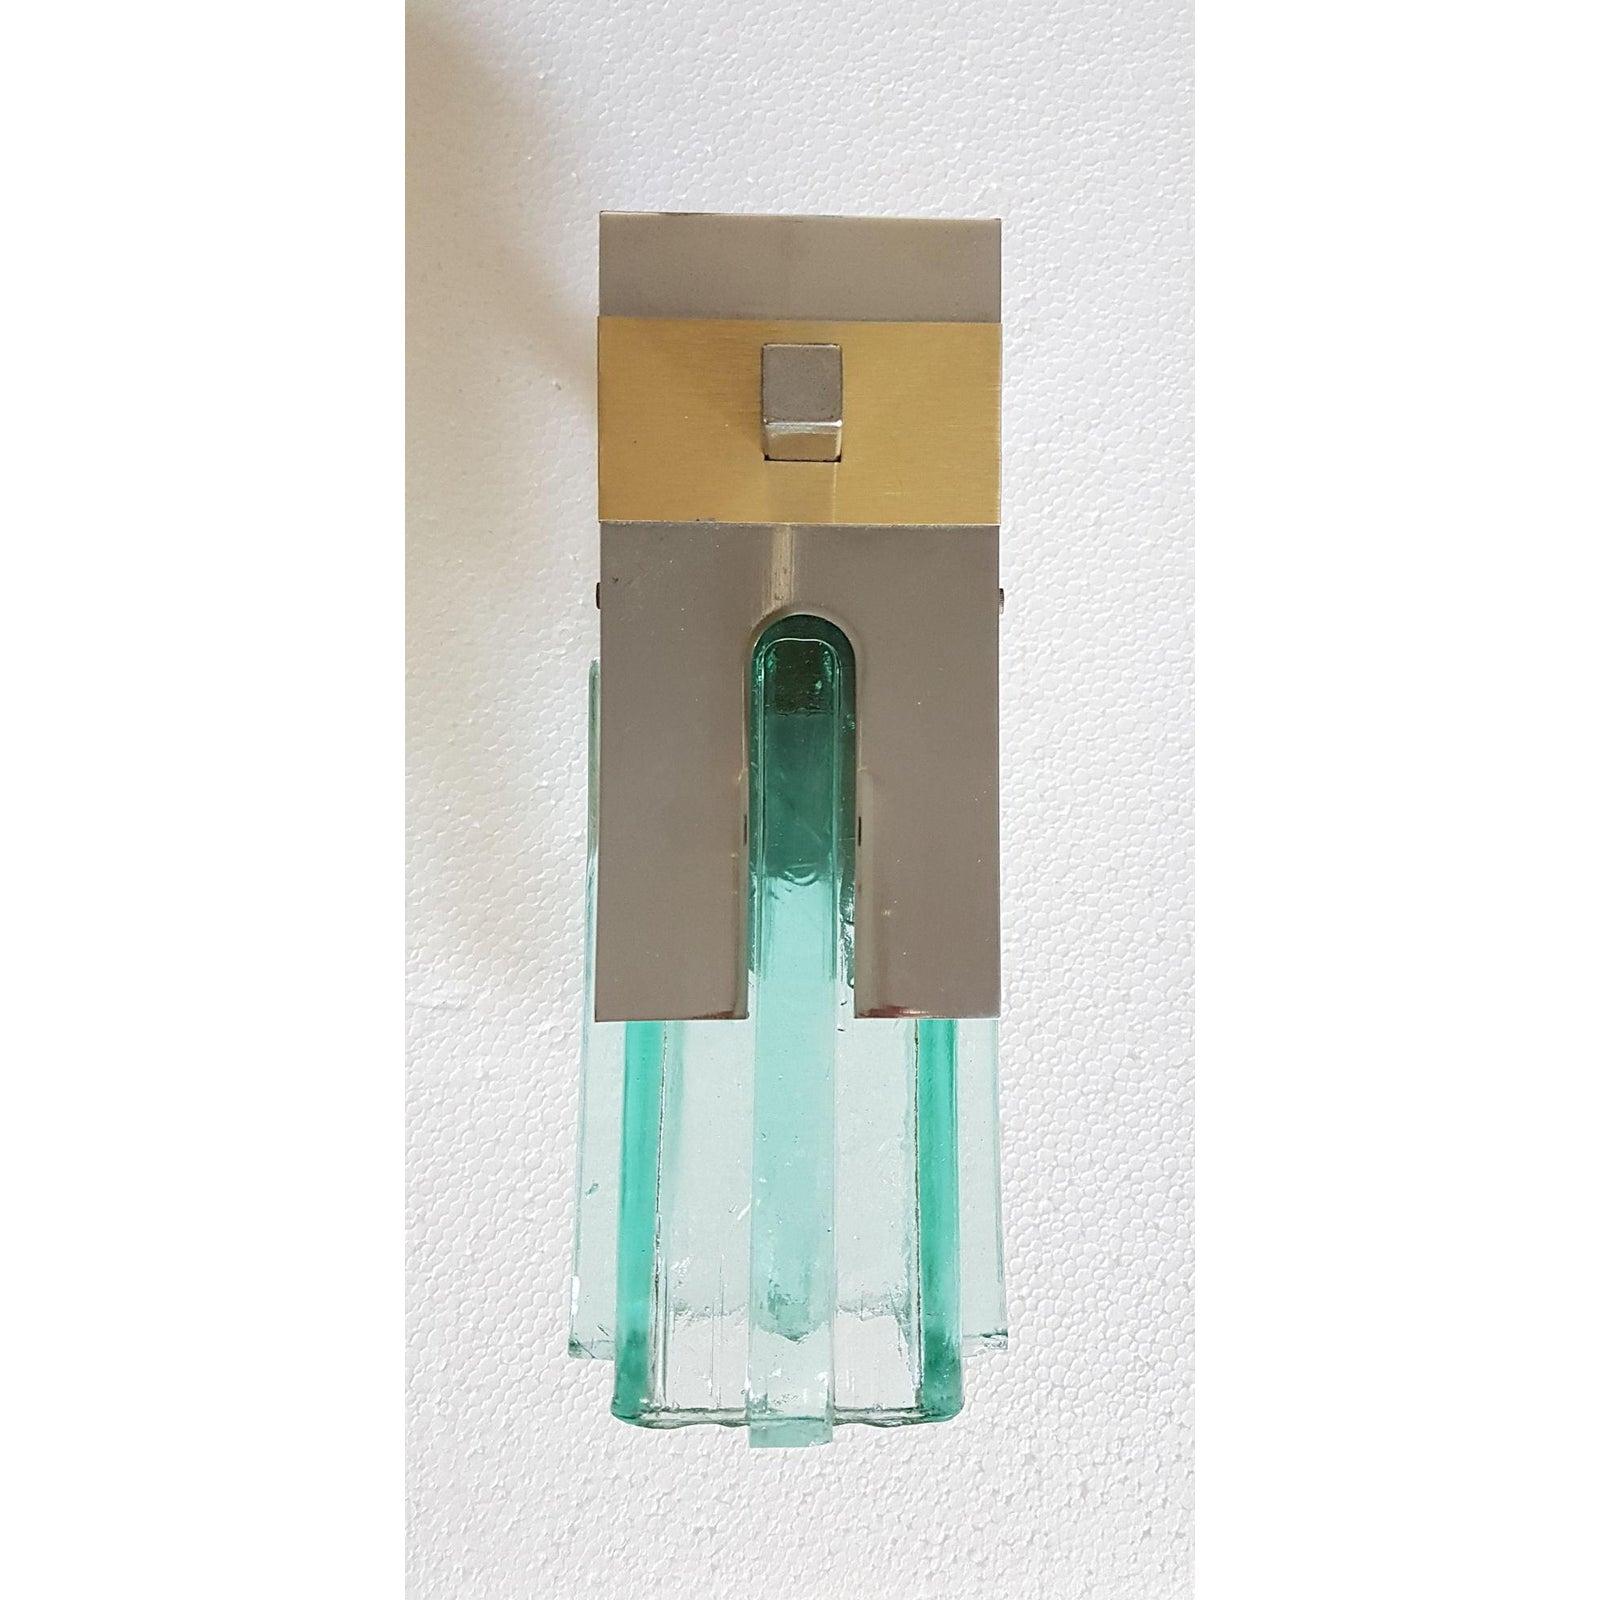 One pair of small Mid-Century Modern geometric wall sconces, Gaetano Sciolari style, Italy, circa 1970.
The wall lights are made of quality chrome, brass and thick light green glass nesting the light bulb.
1 light each, rewired for the US.
Good